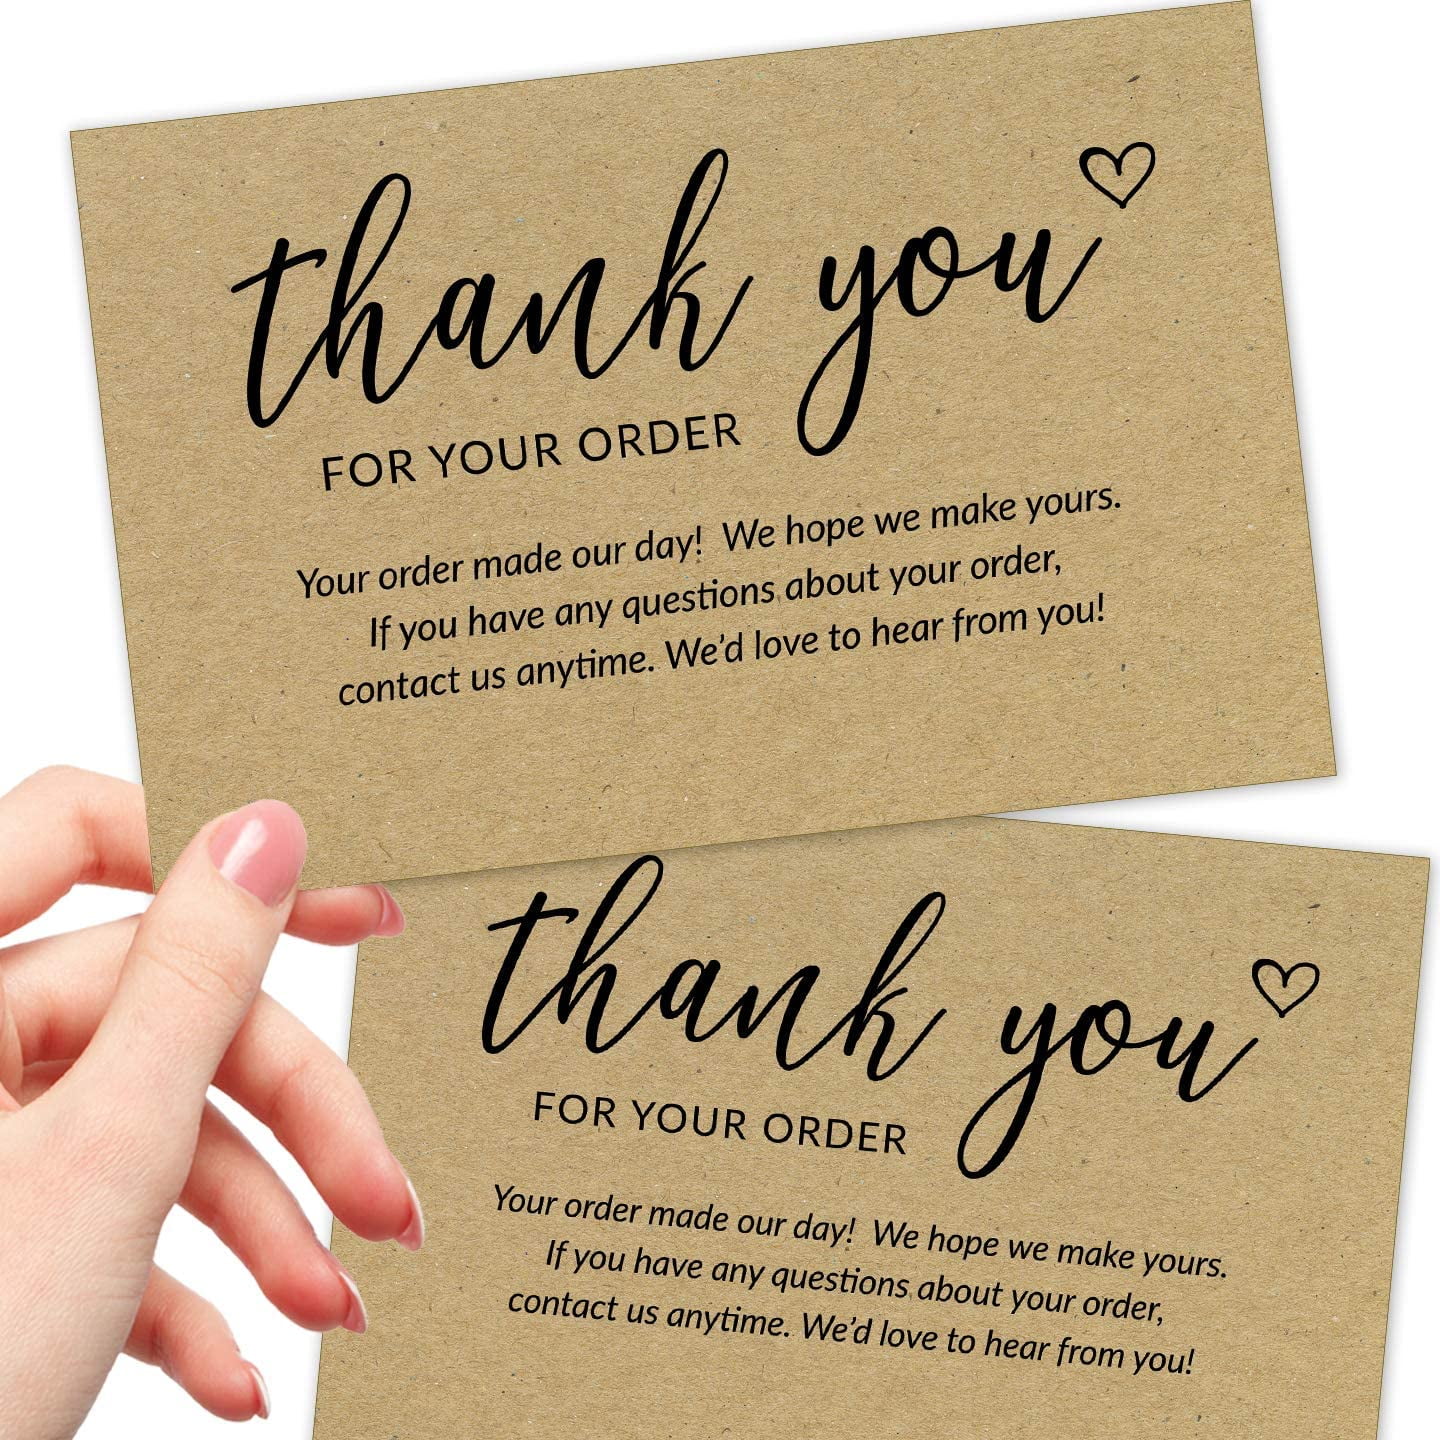 B-6 Thank You packaging insert mini note cards small notes 3x3 thank you card |Thank you for supporting my small business